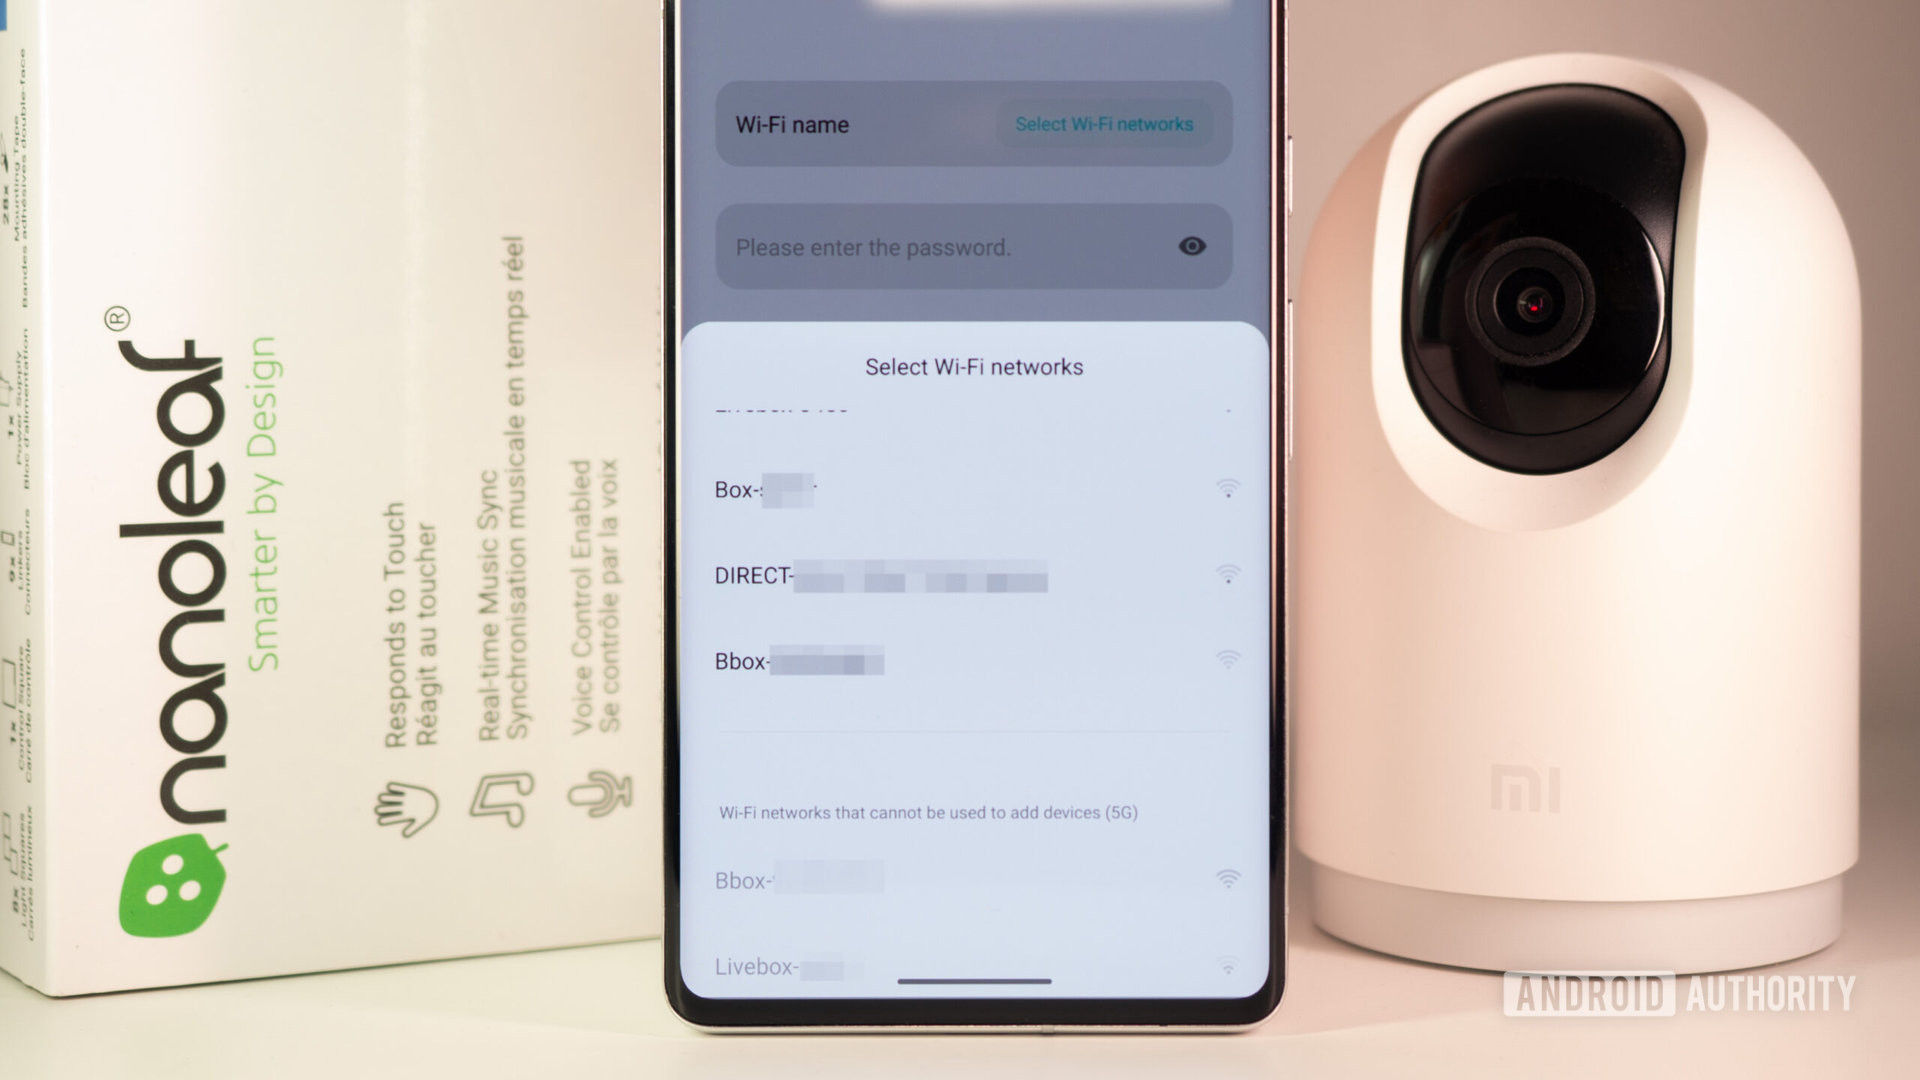 Xiaomi Mi 360 security camera and Nanoleaf Canvas box behind a smartphone showing an error when connecting to a 5GHz Wi-Fi network.